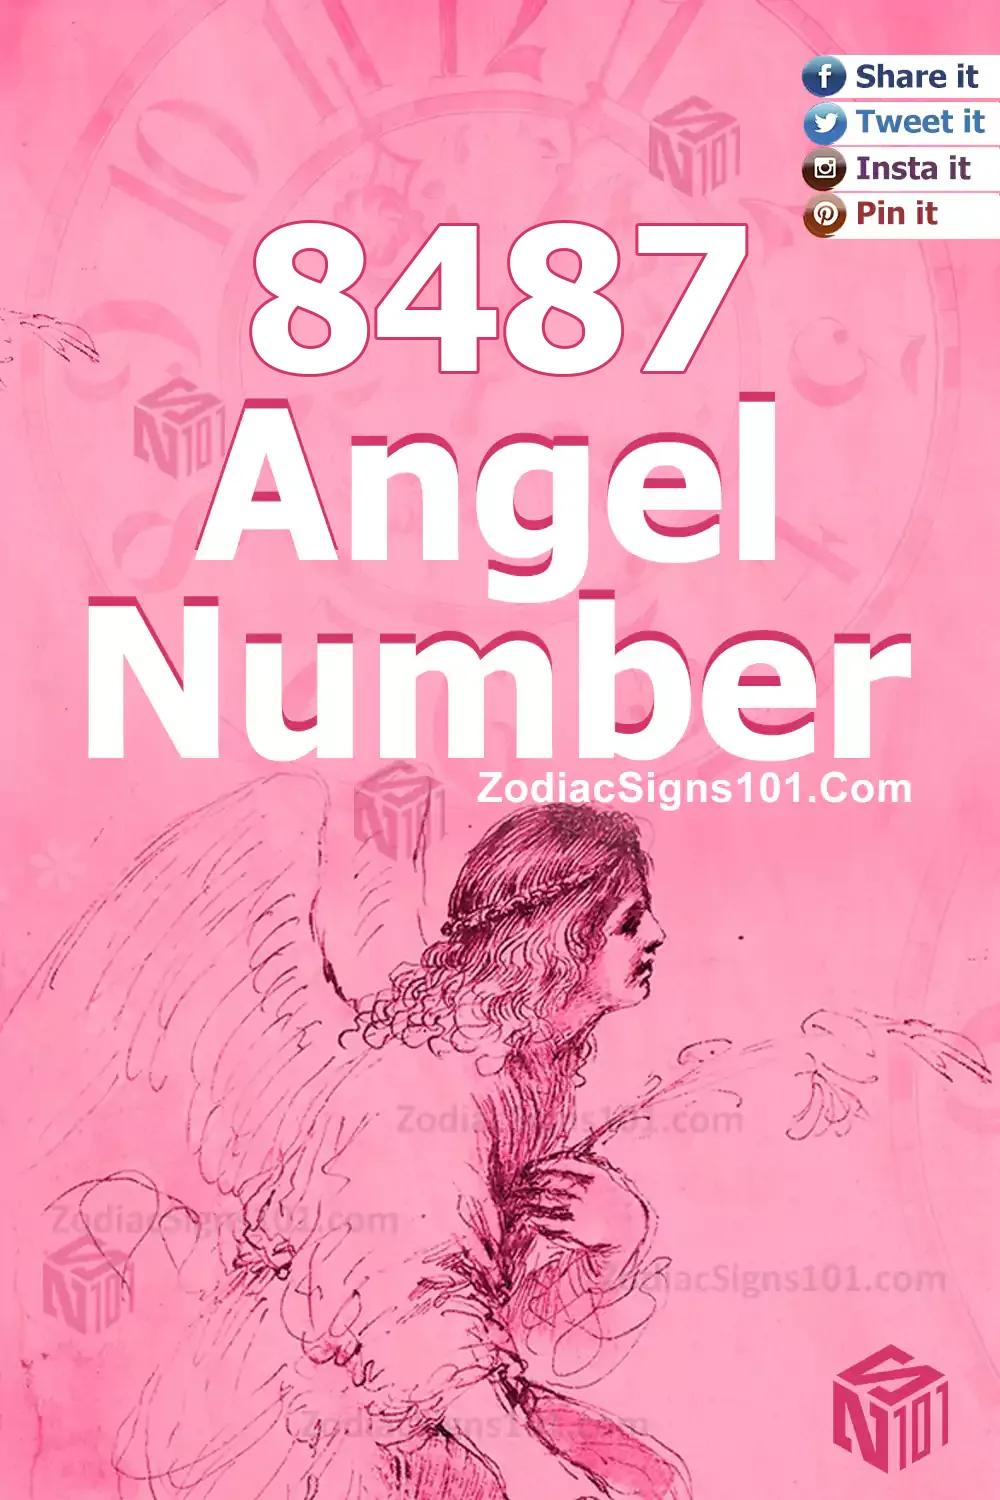 8487 Angel Number Meaning